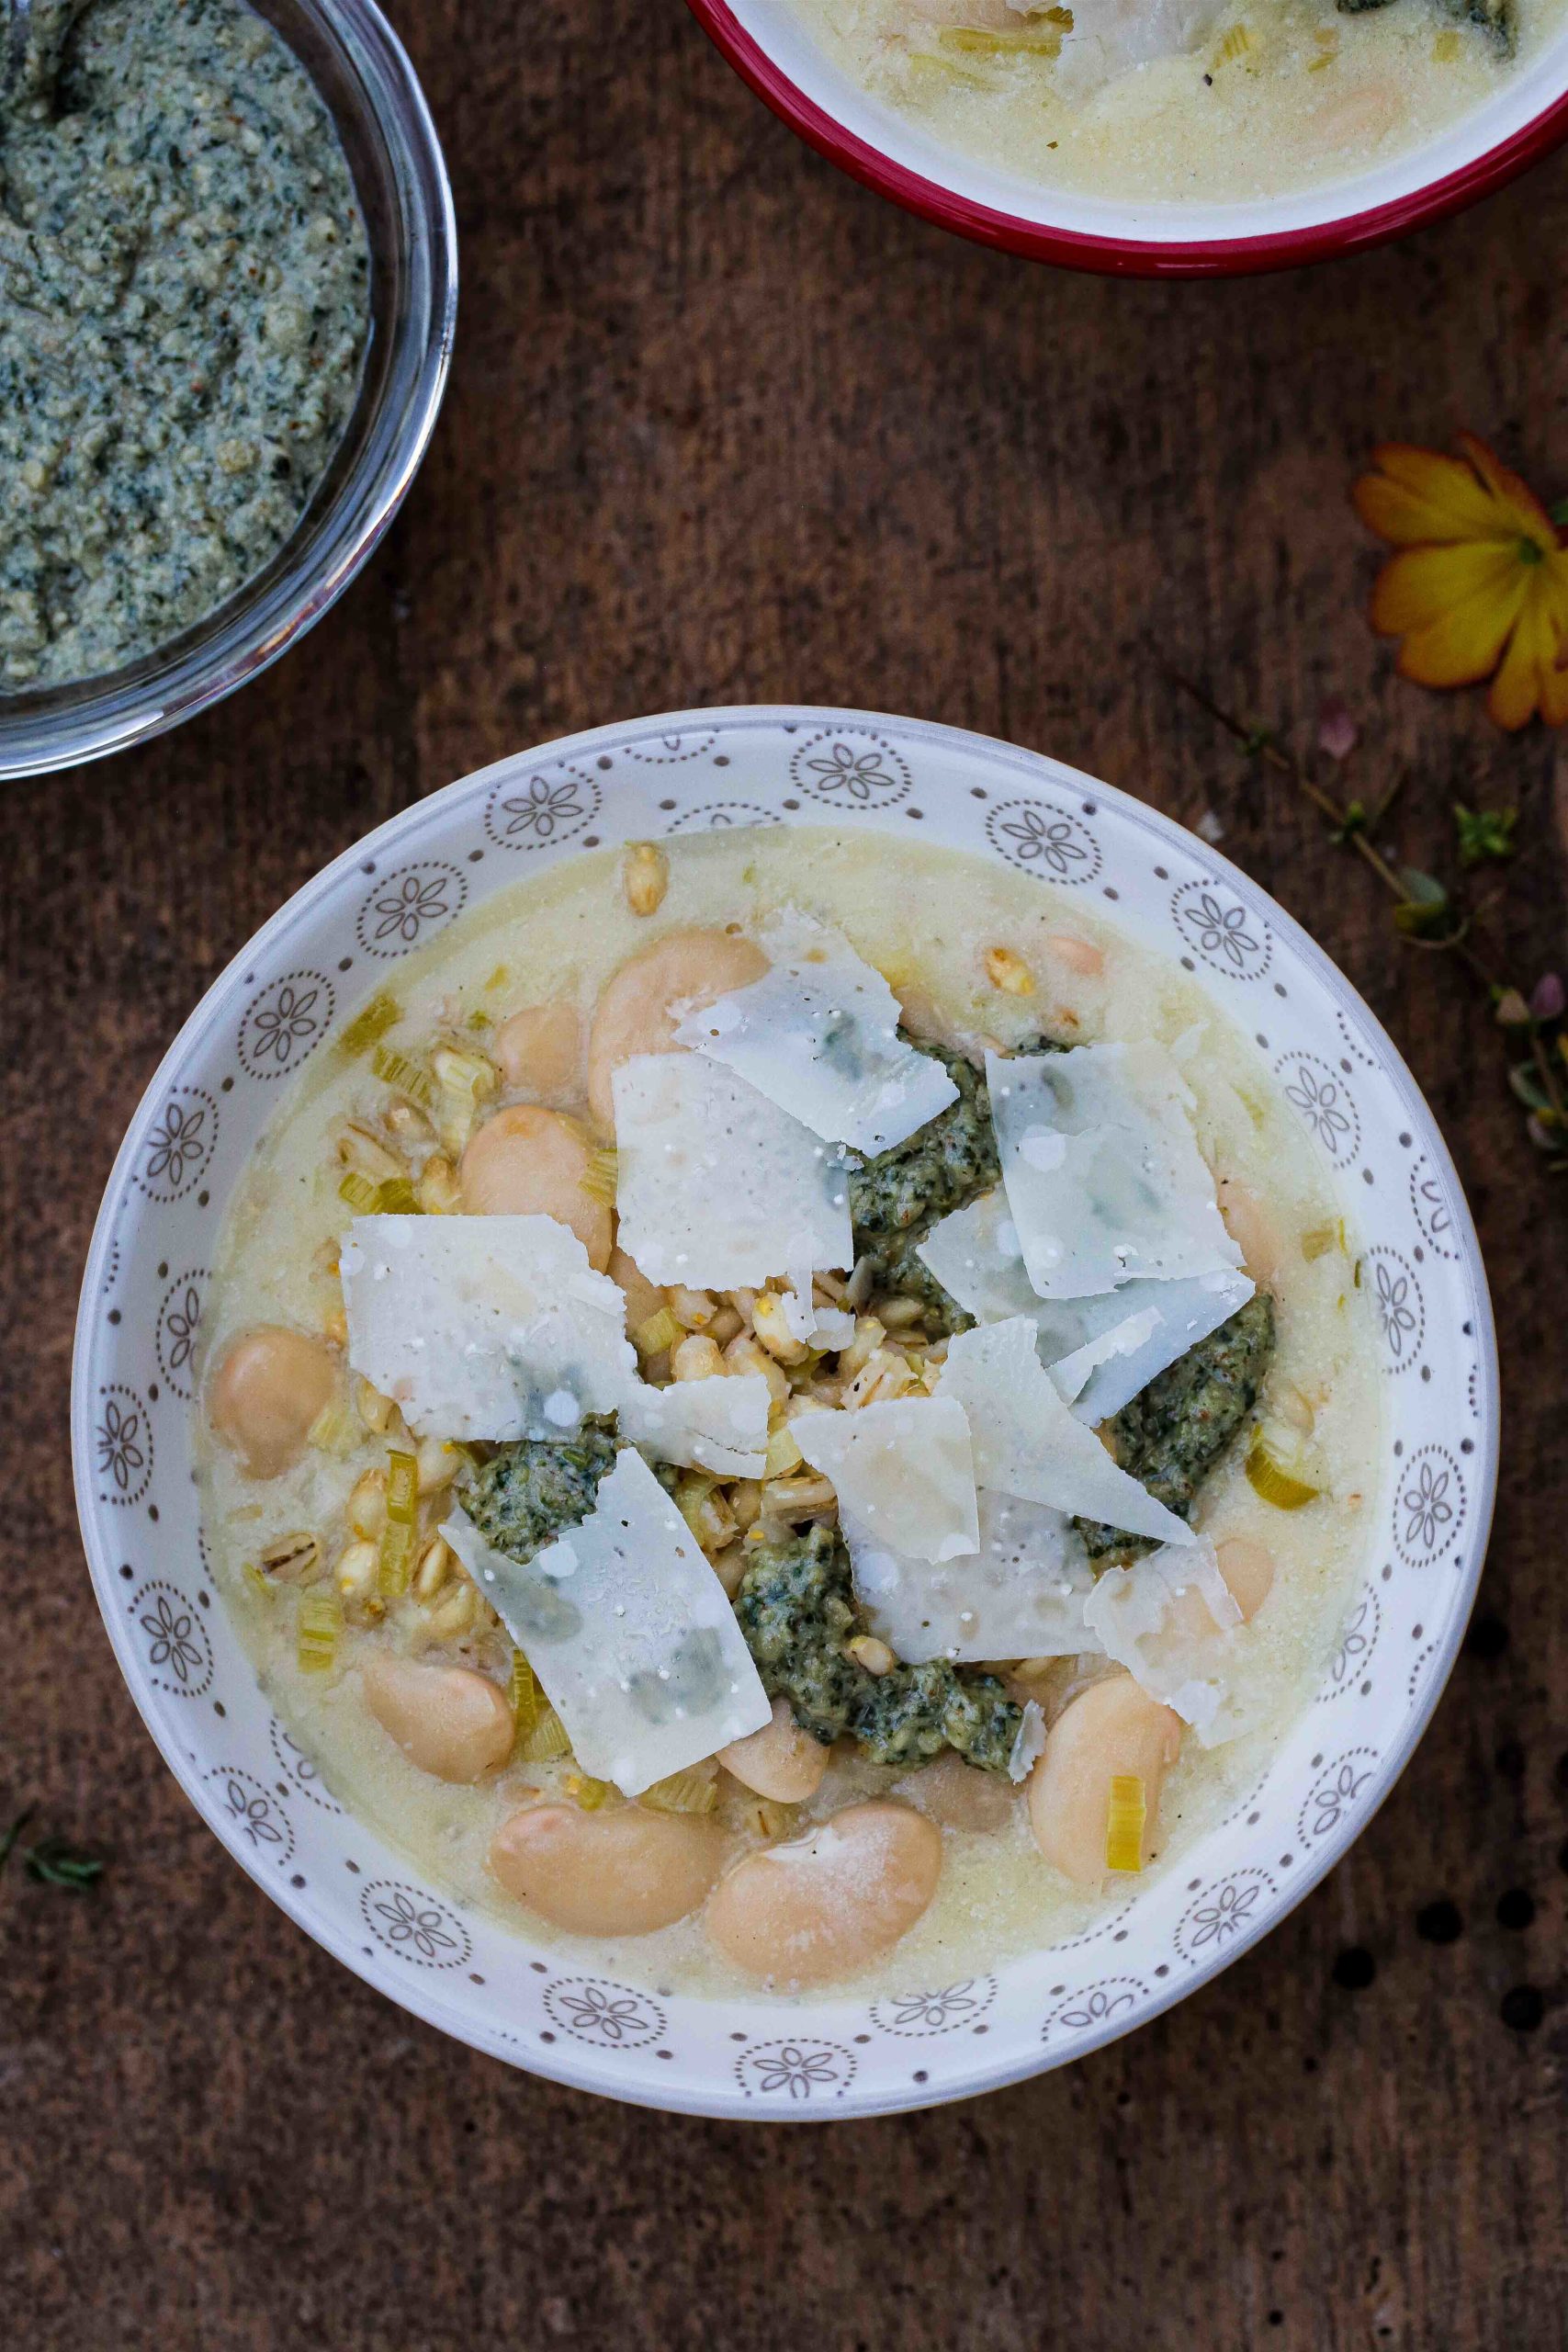 This rich and creamy white bean soup with leeks, pearl barley and pesto is so easy to make - just one pan needed - and full of hearty delicious flavours! Recipe on thecookandhim.com #vegansoup #whitebeansoup #vegansouprecipe